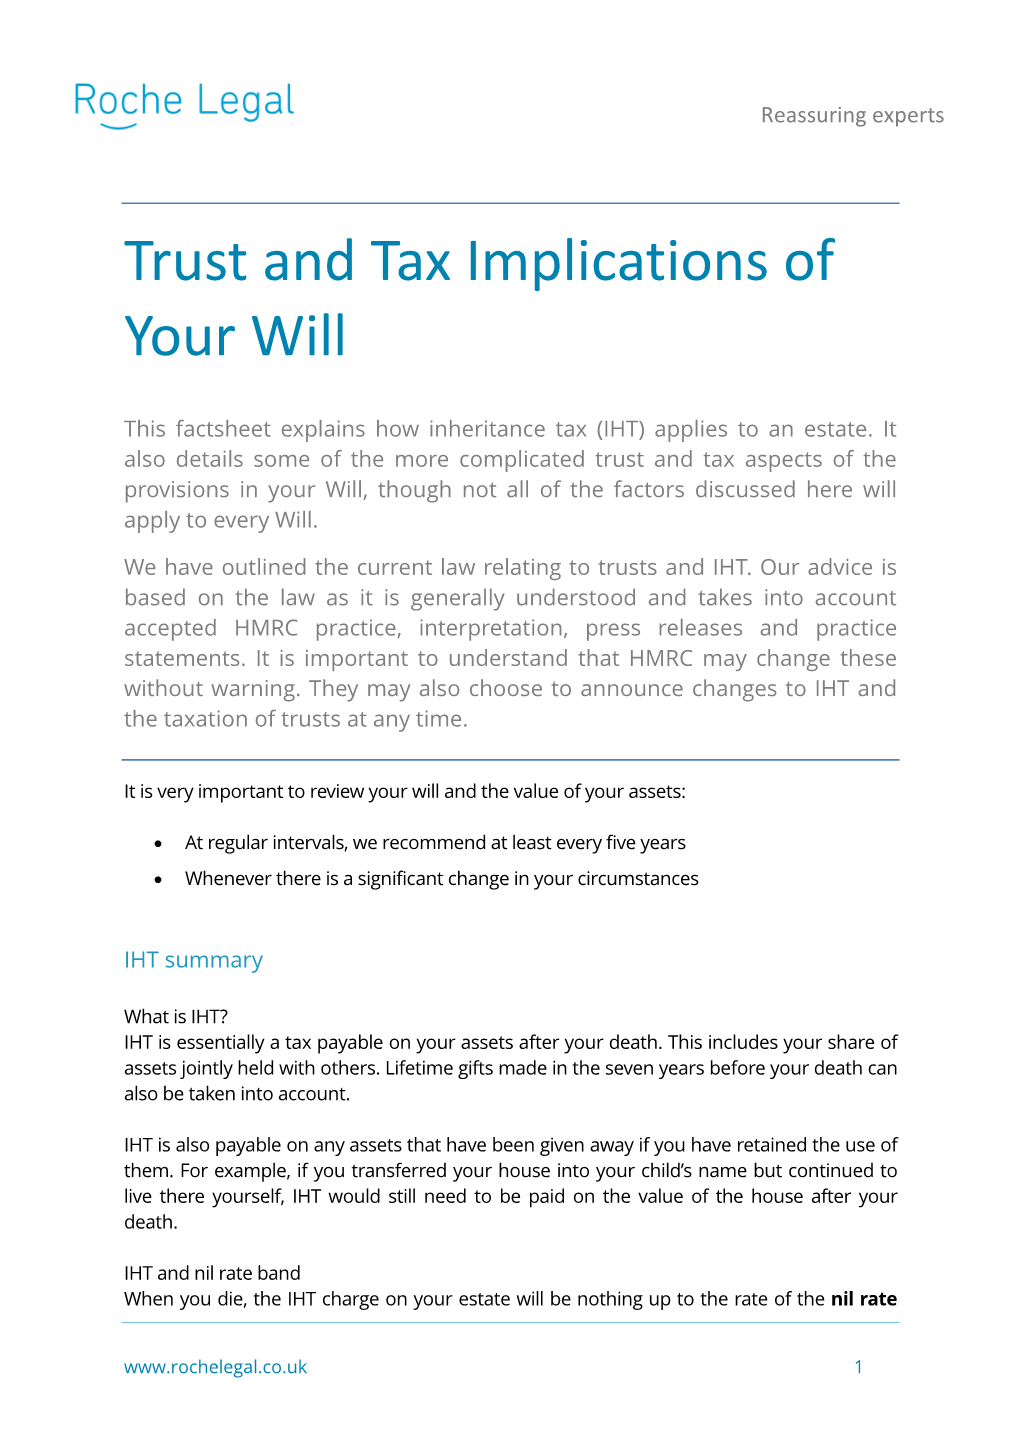 Trust and Tax Implications of Your Will